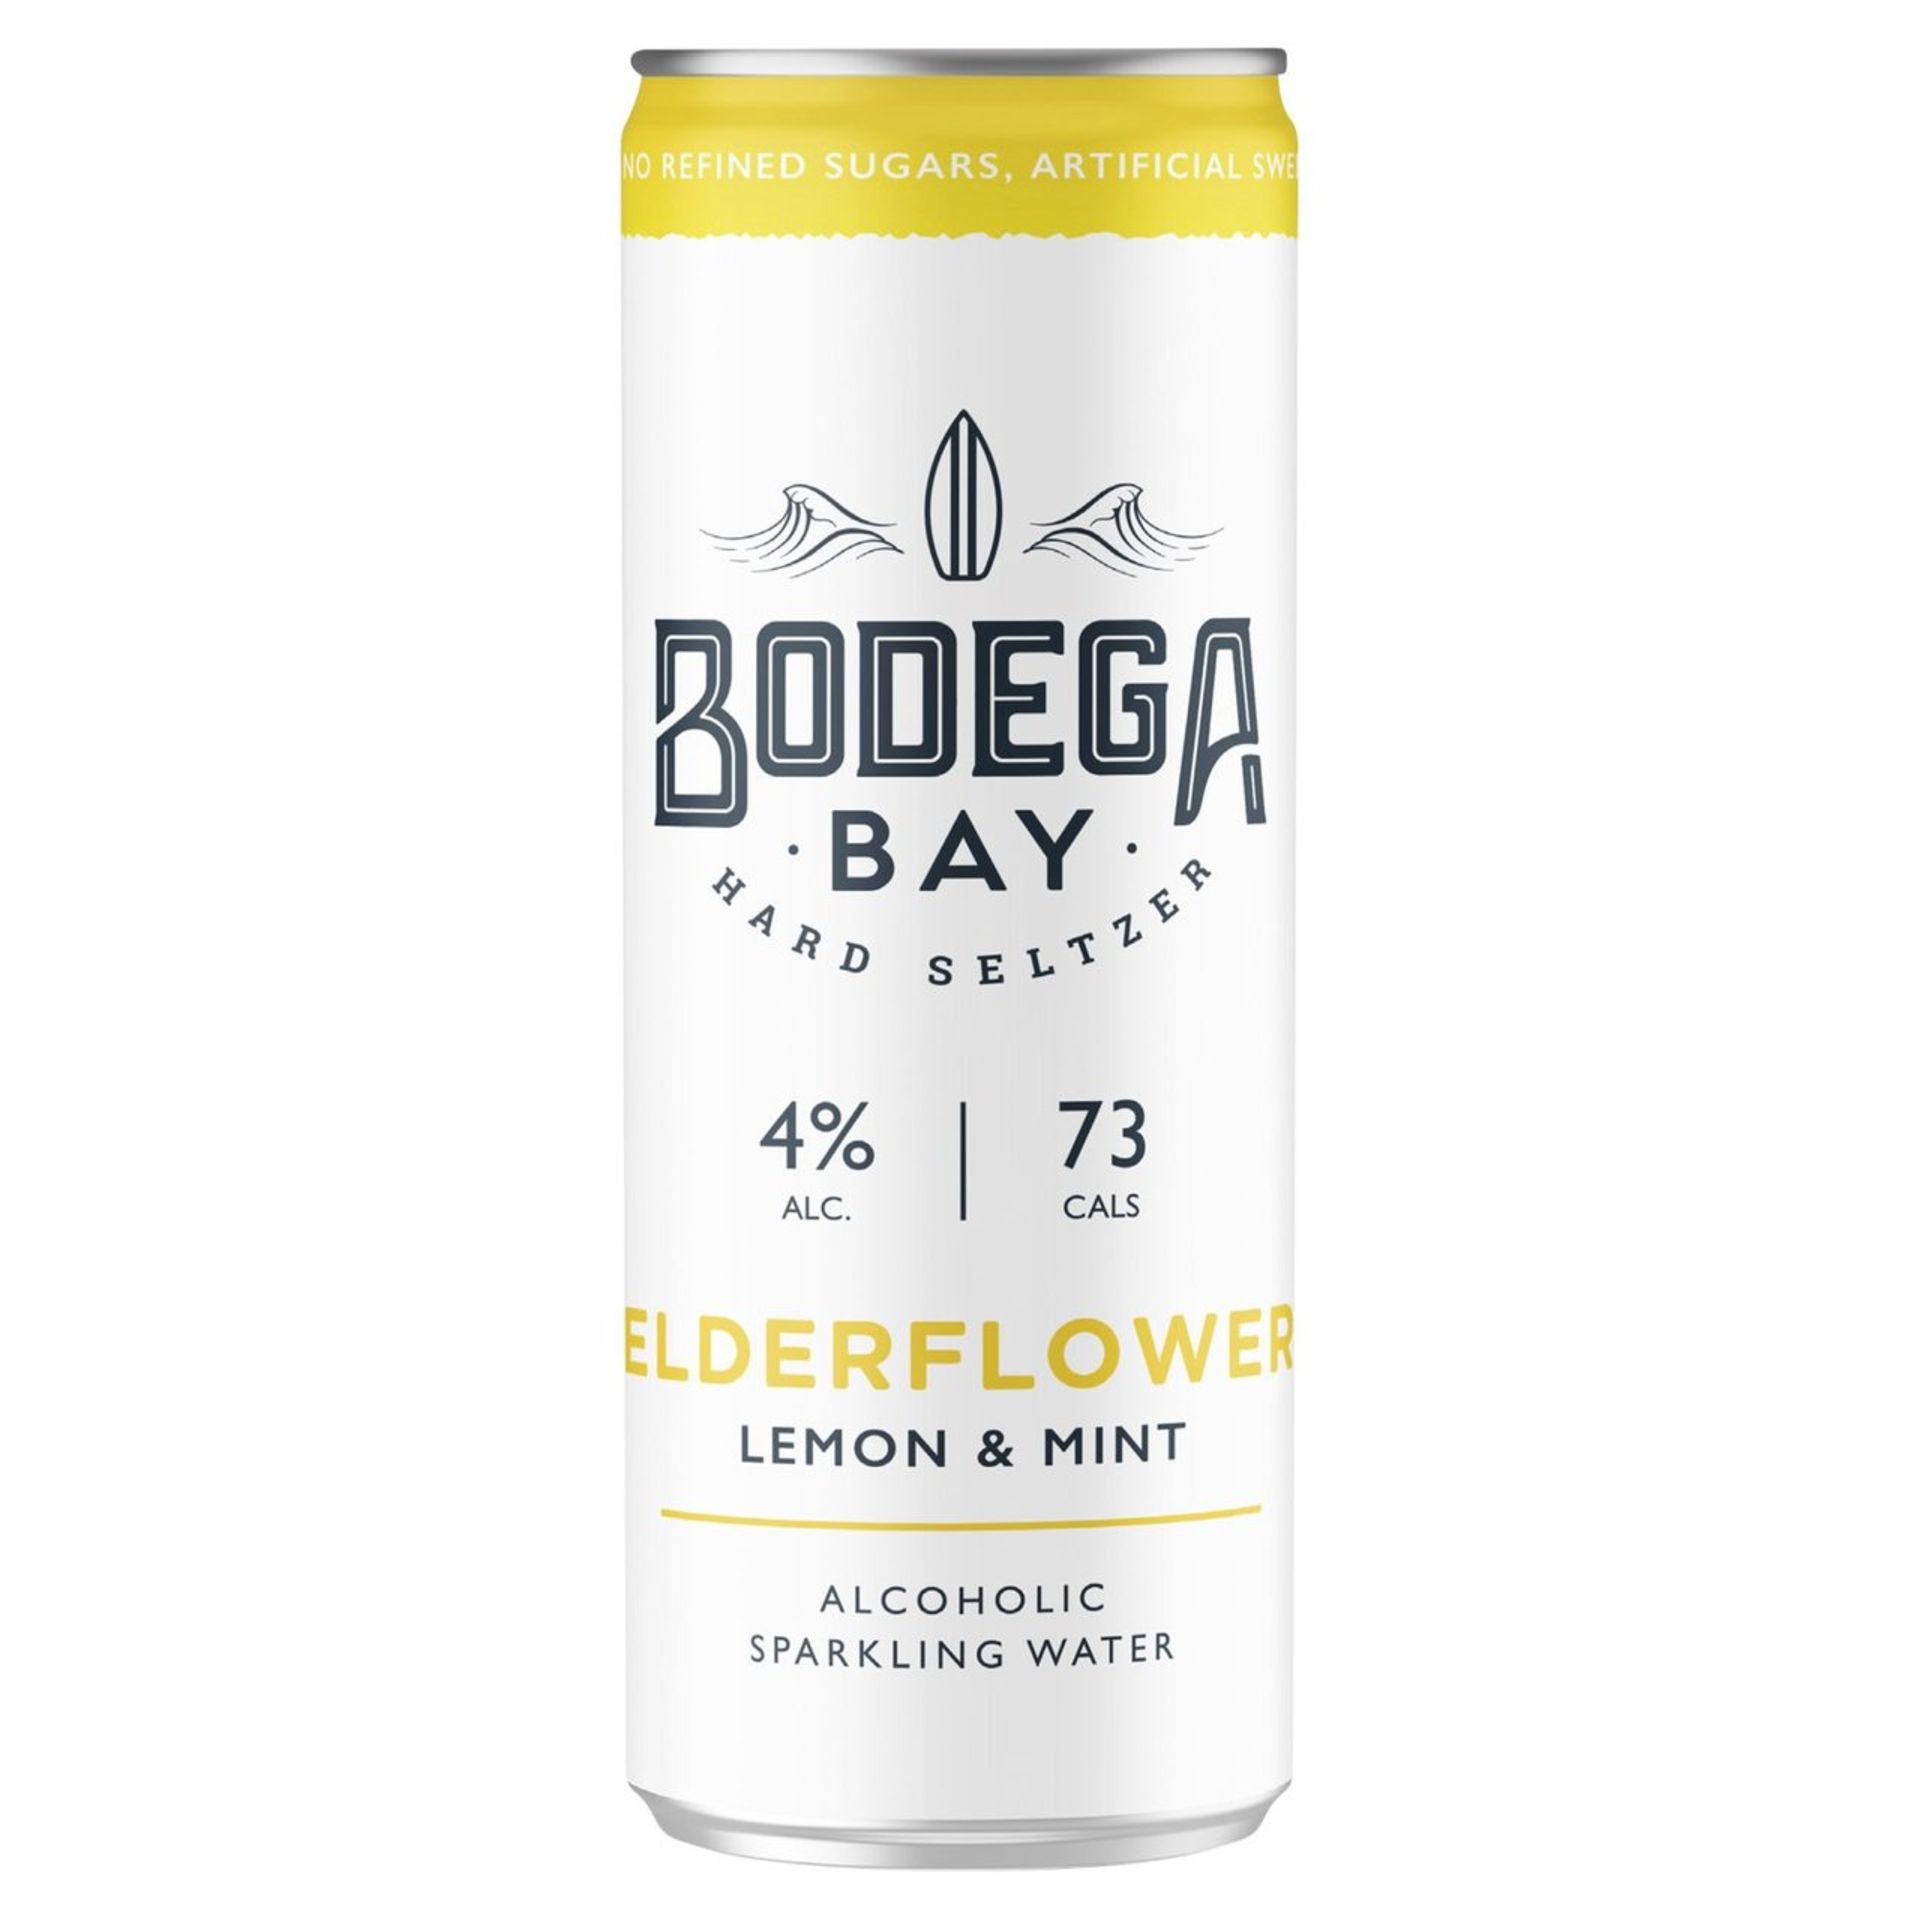 360 x Cans of Bodega Bay Hard Seltzer 250ml Alcoholic Sparkling Water Drinks - Various Flavours - Image 2 of 15